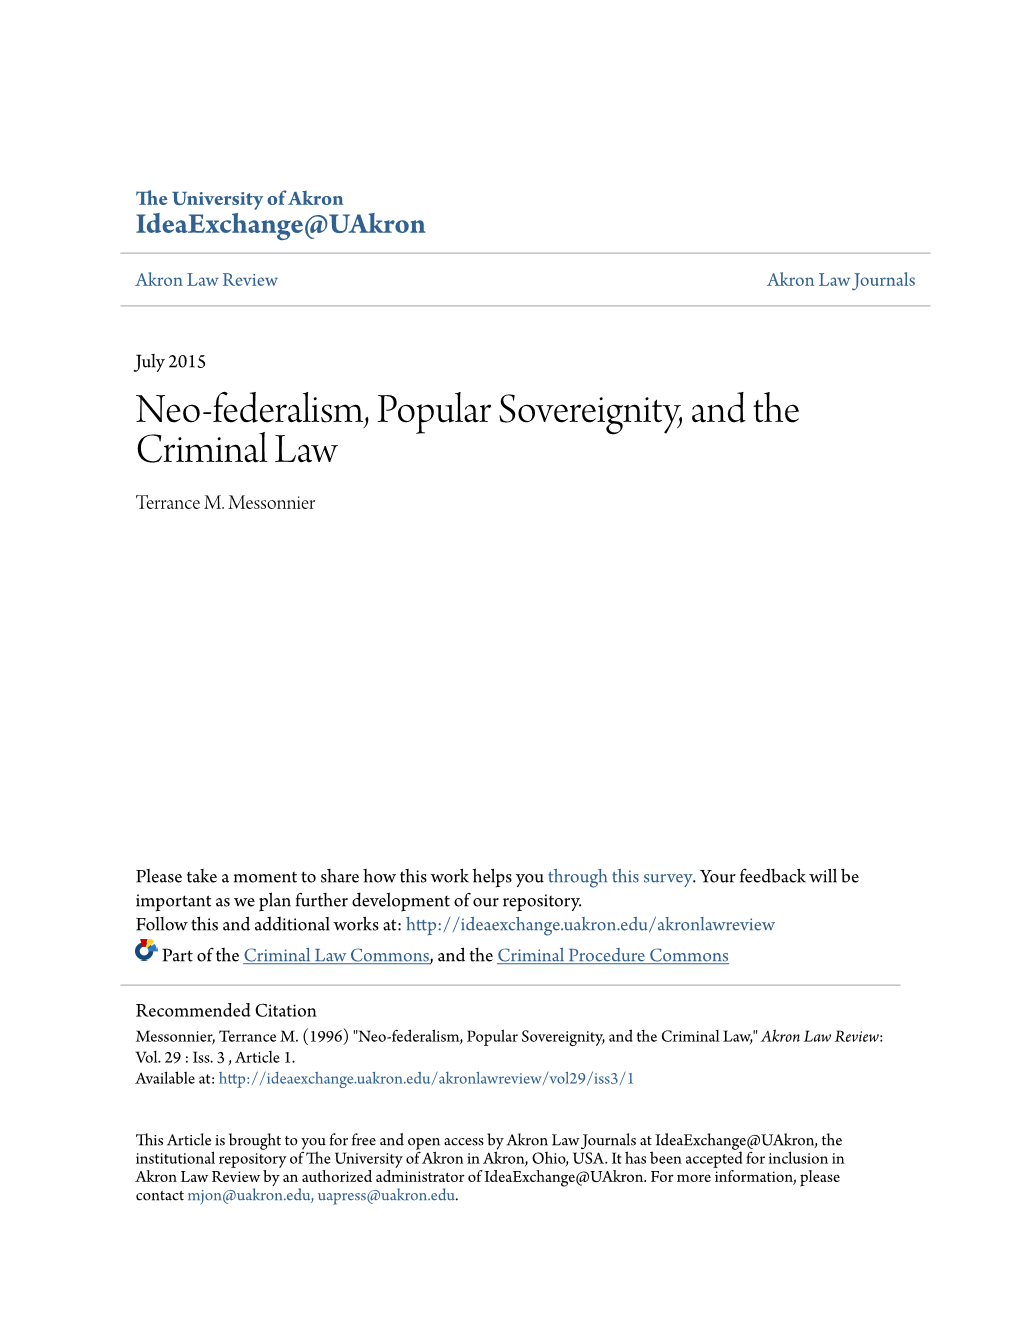 Neo-Federalism, Popular Sovereignity, and the Criminal Law Terrance M